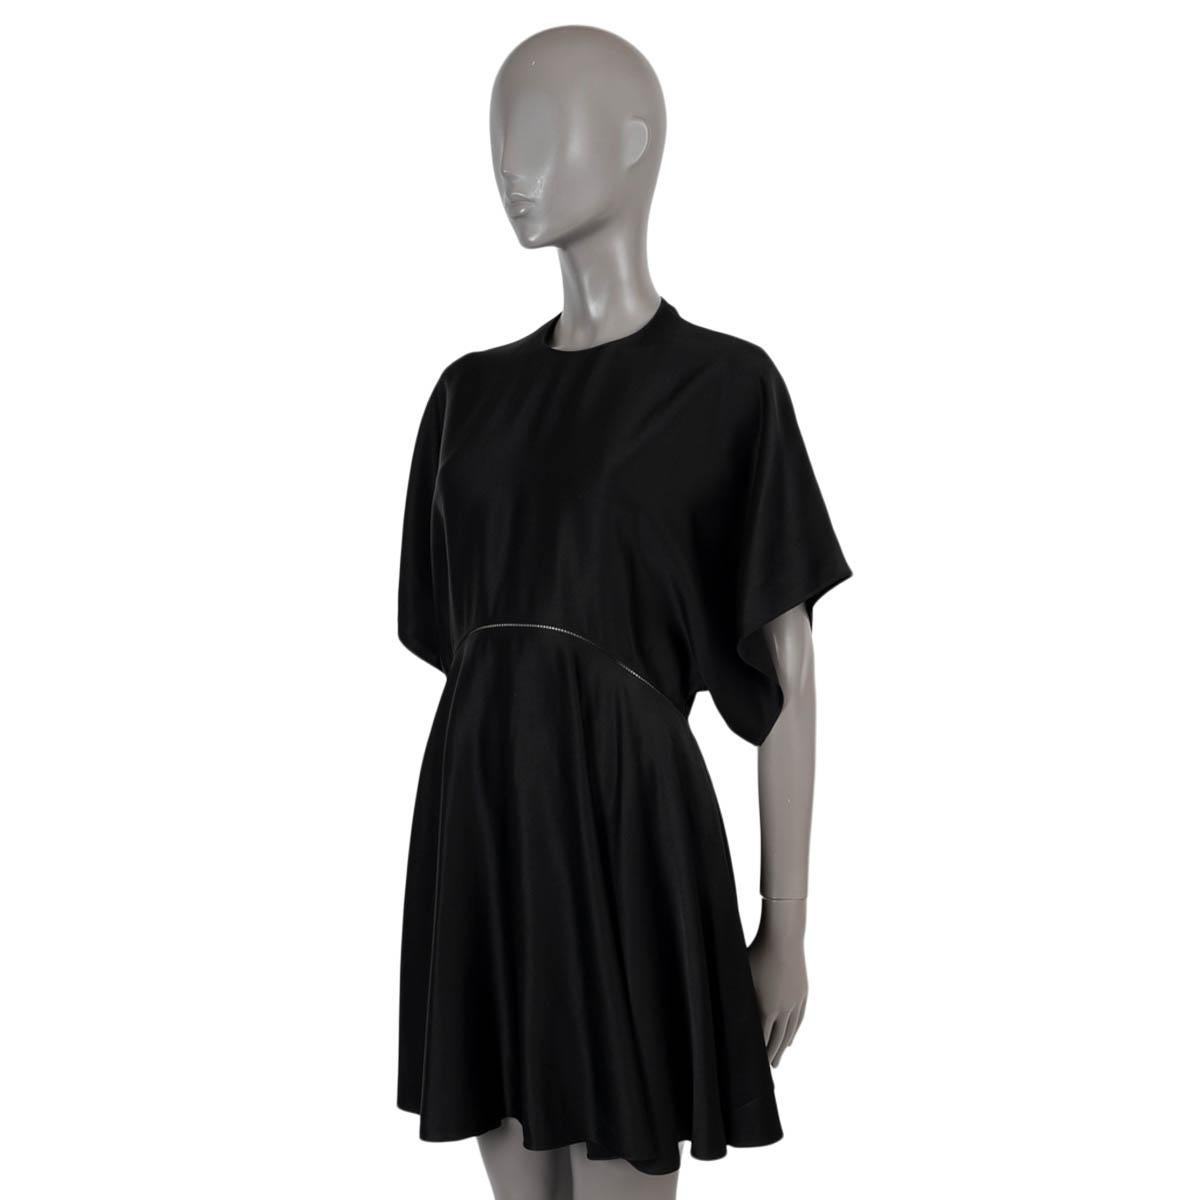 100% authentic Alaïa short skater dress in black viscose (56%) and acetate (44%). Features short sleeves, a flared skirt and a pointelle stripe at the waist. Opens with a concealed zipper on the back. Unlined. Has been worn and is in excellent